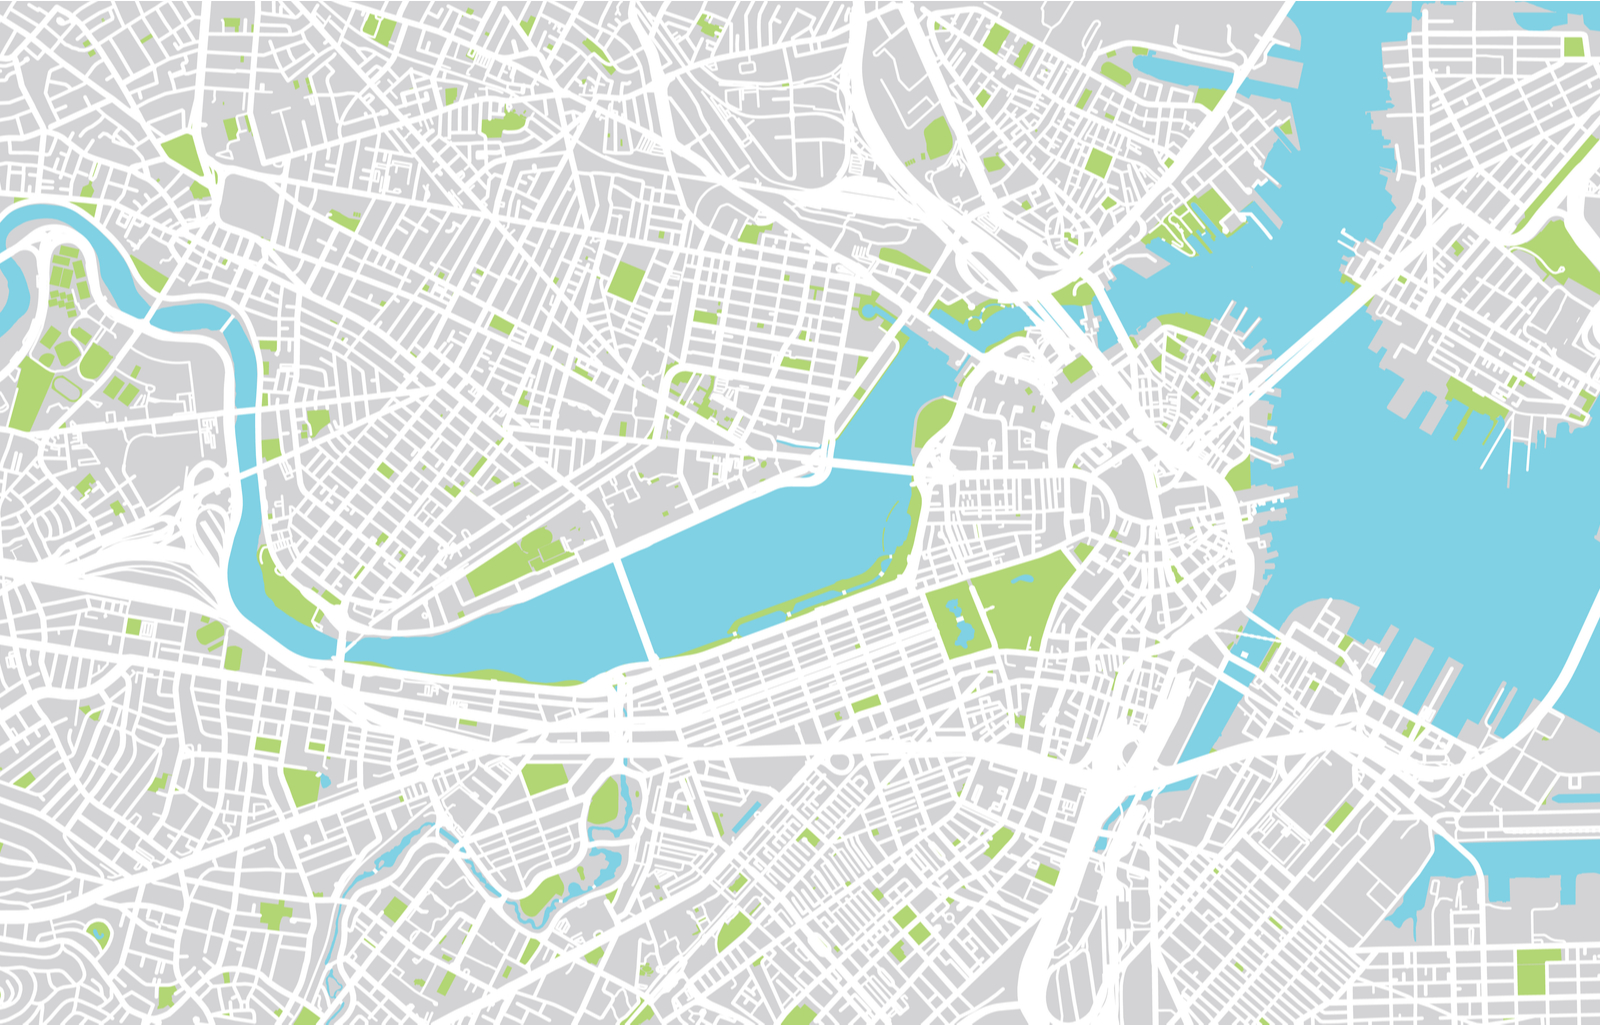 Unique view of a map showing where to stay in Boston in vector format